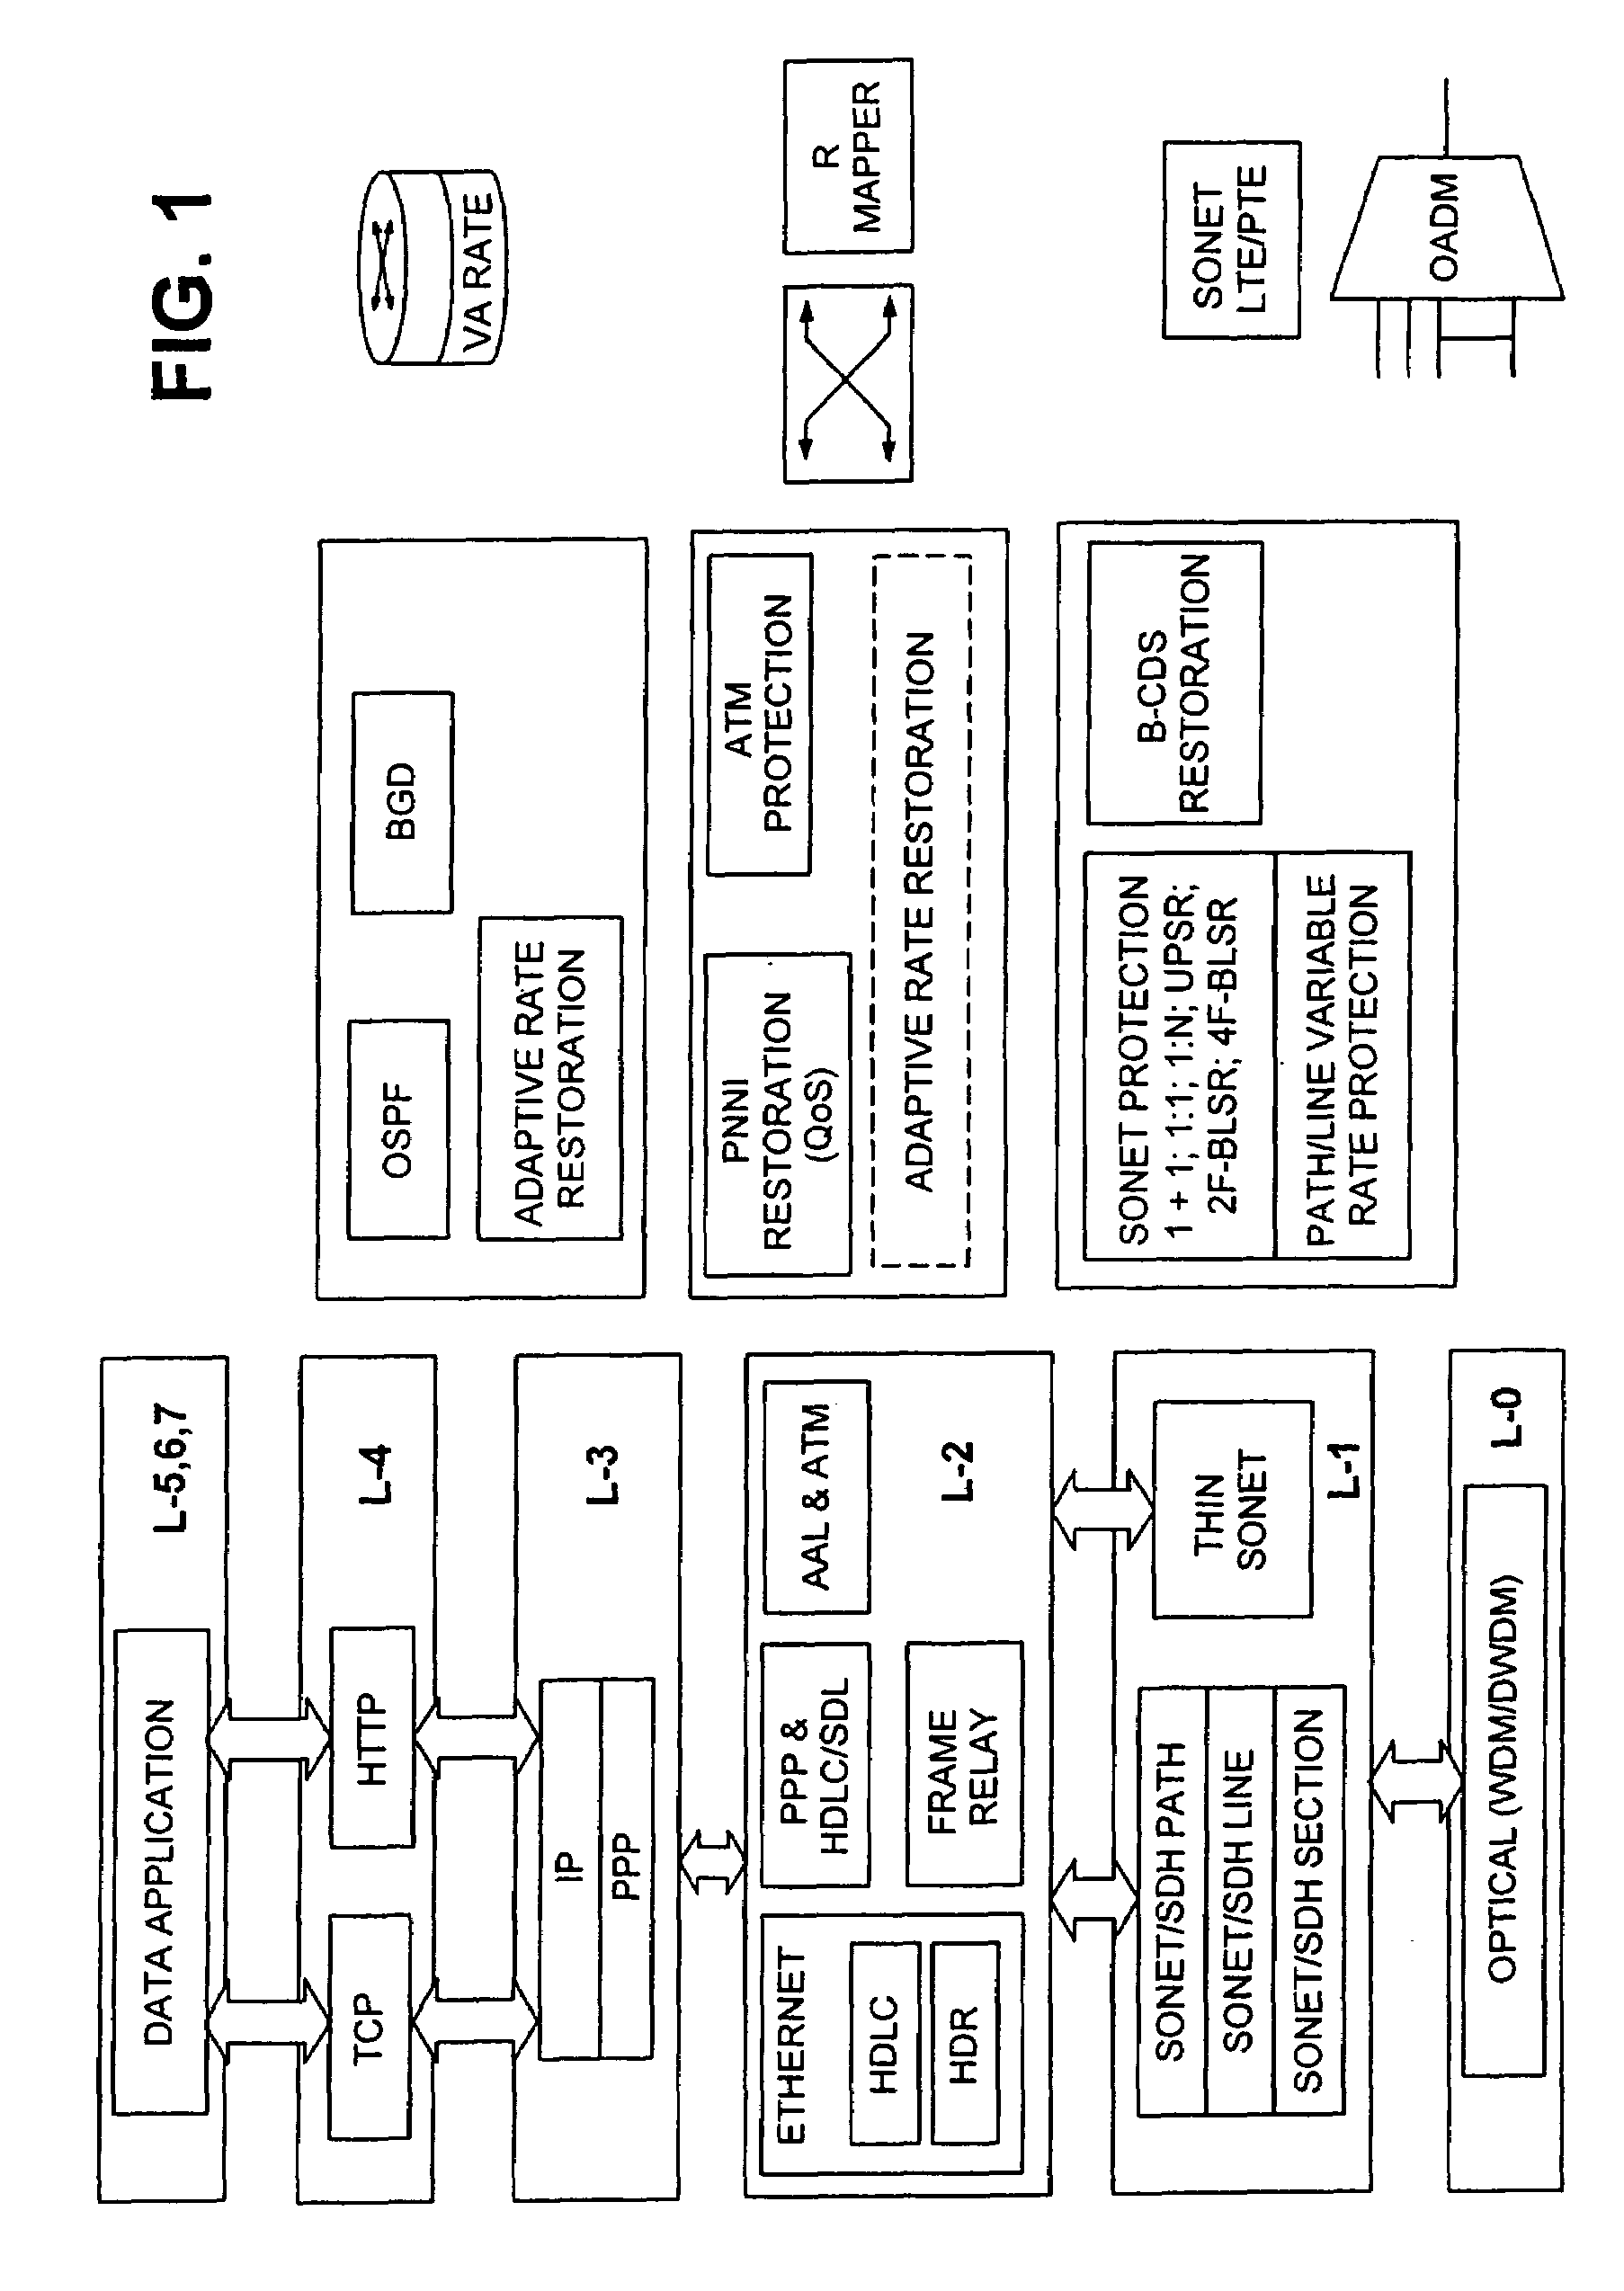 Adaptive rate traffic recovery mechanism for communication networks